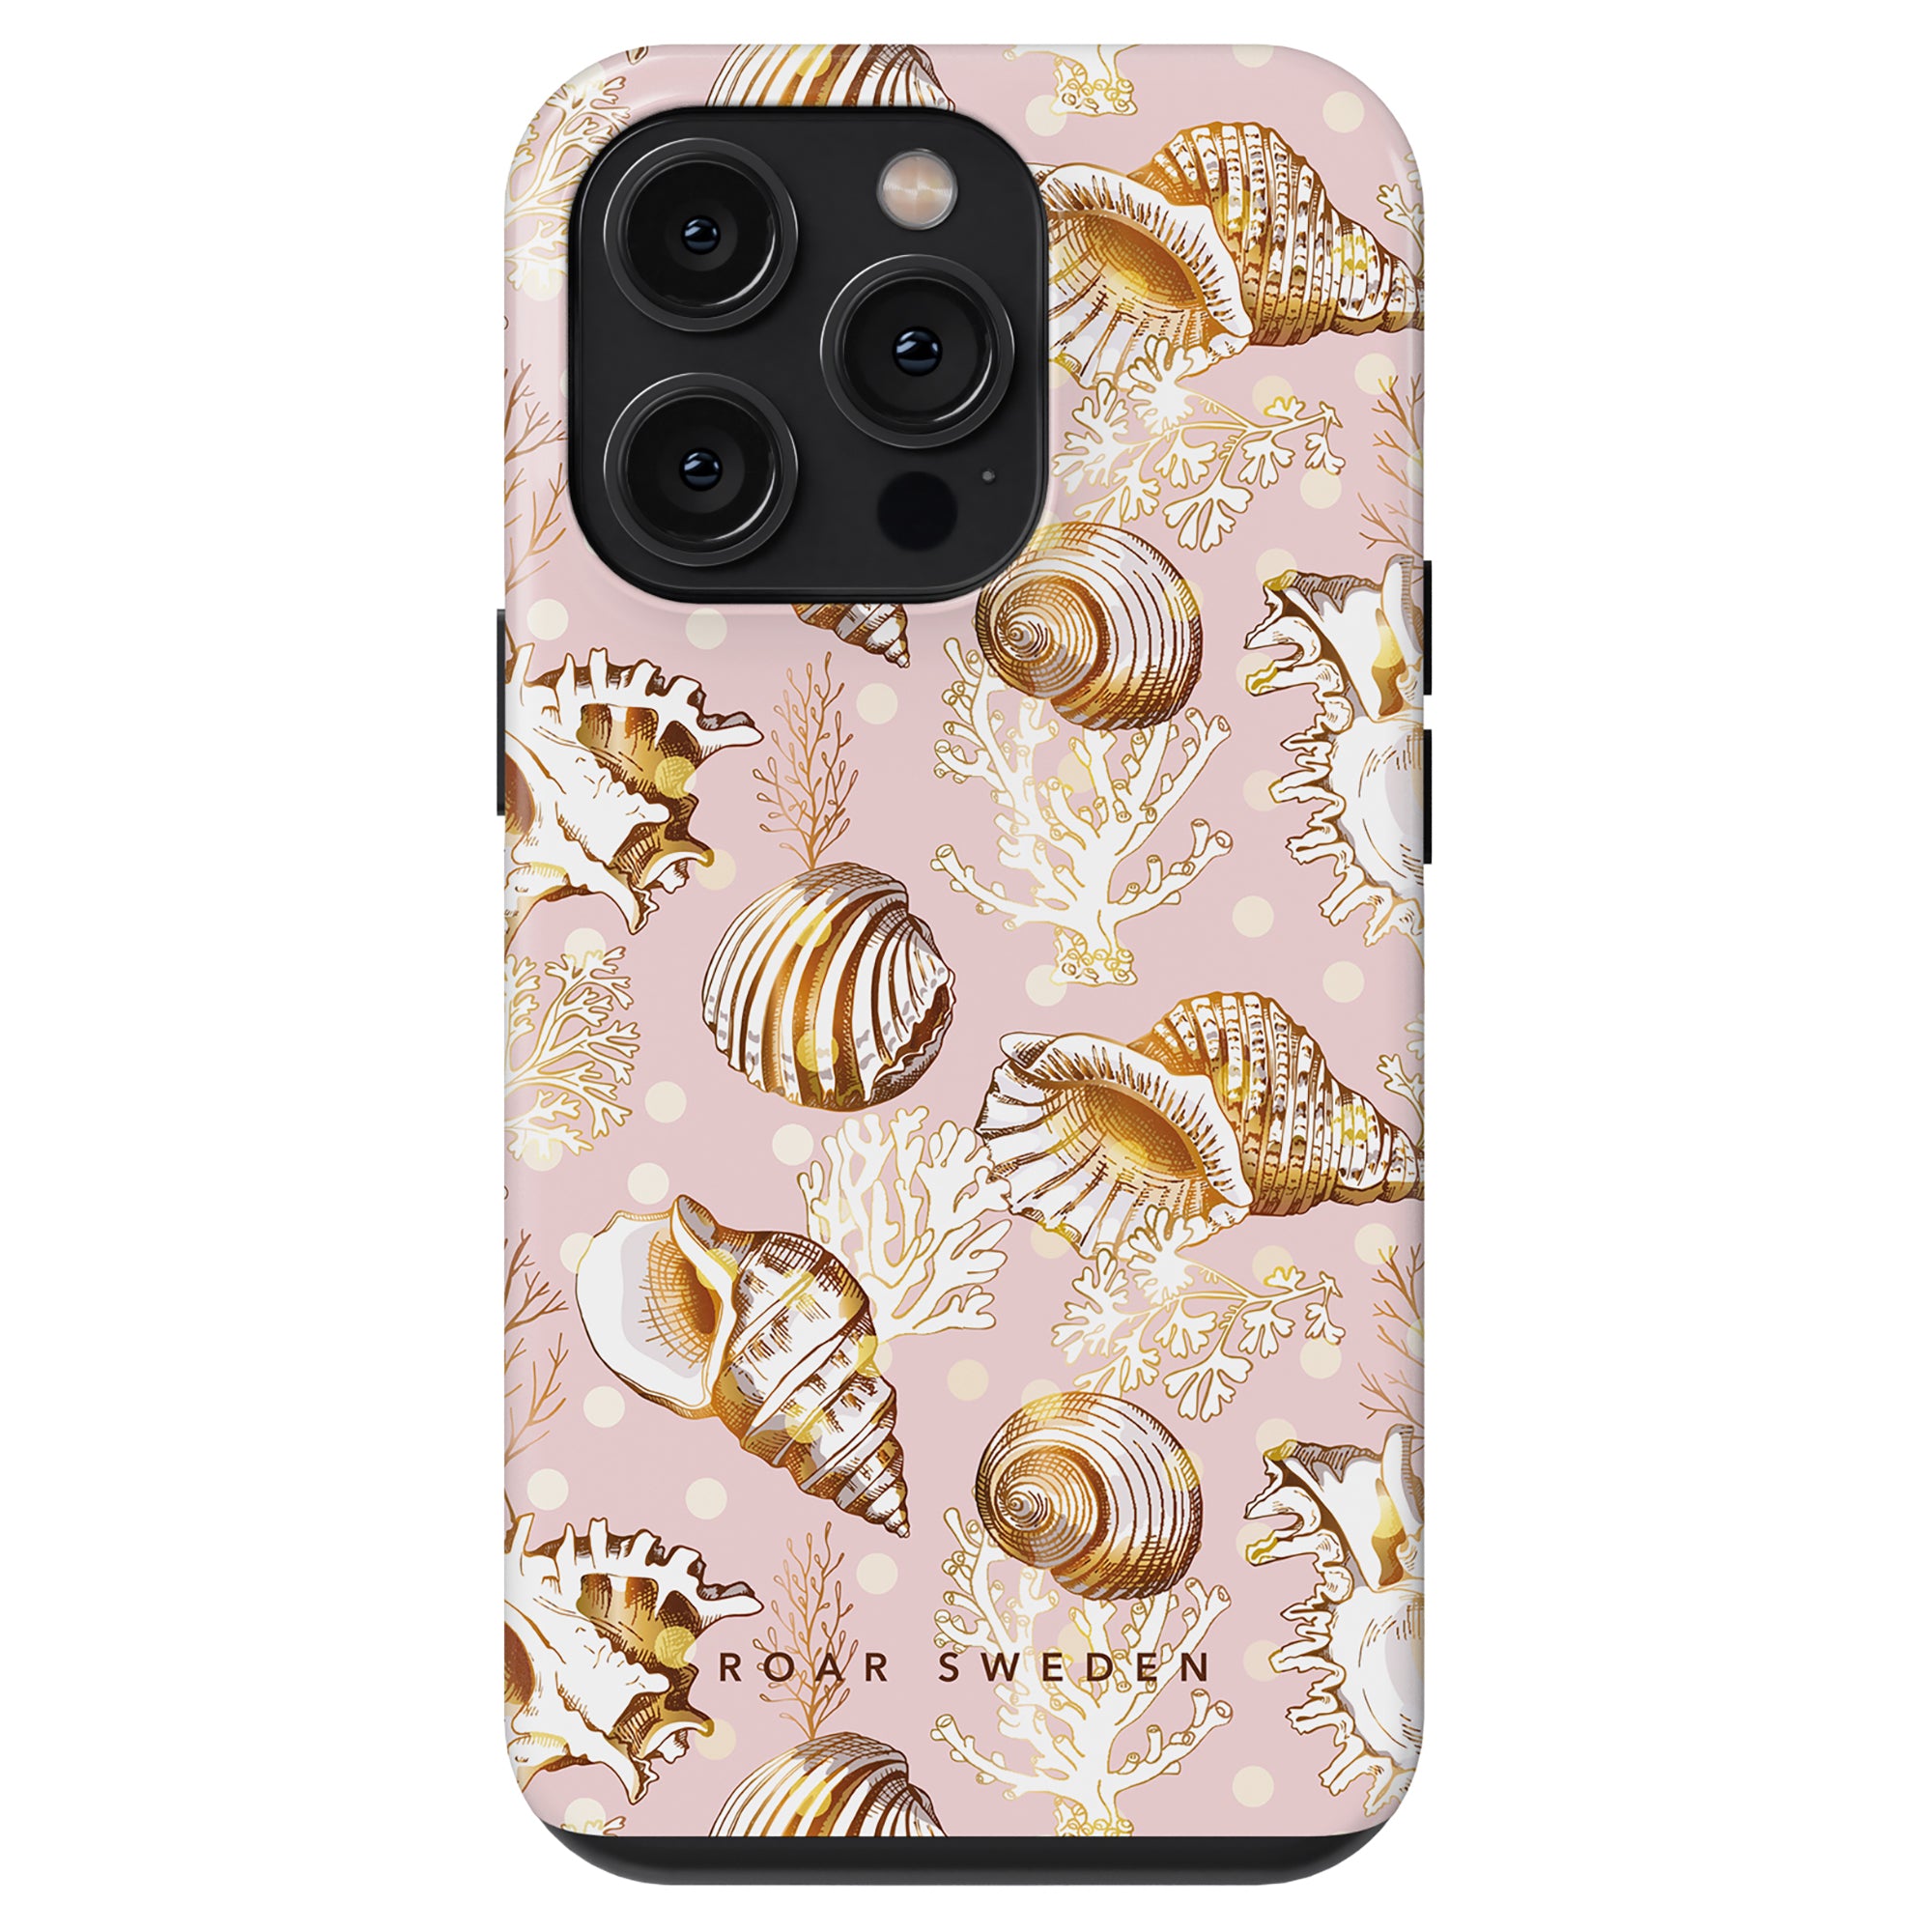 A Bivalvia - Tough Case from the ocean collection with a seashell pattern design and cutouts for the camera lenses.